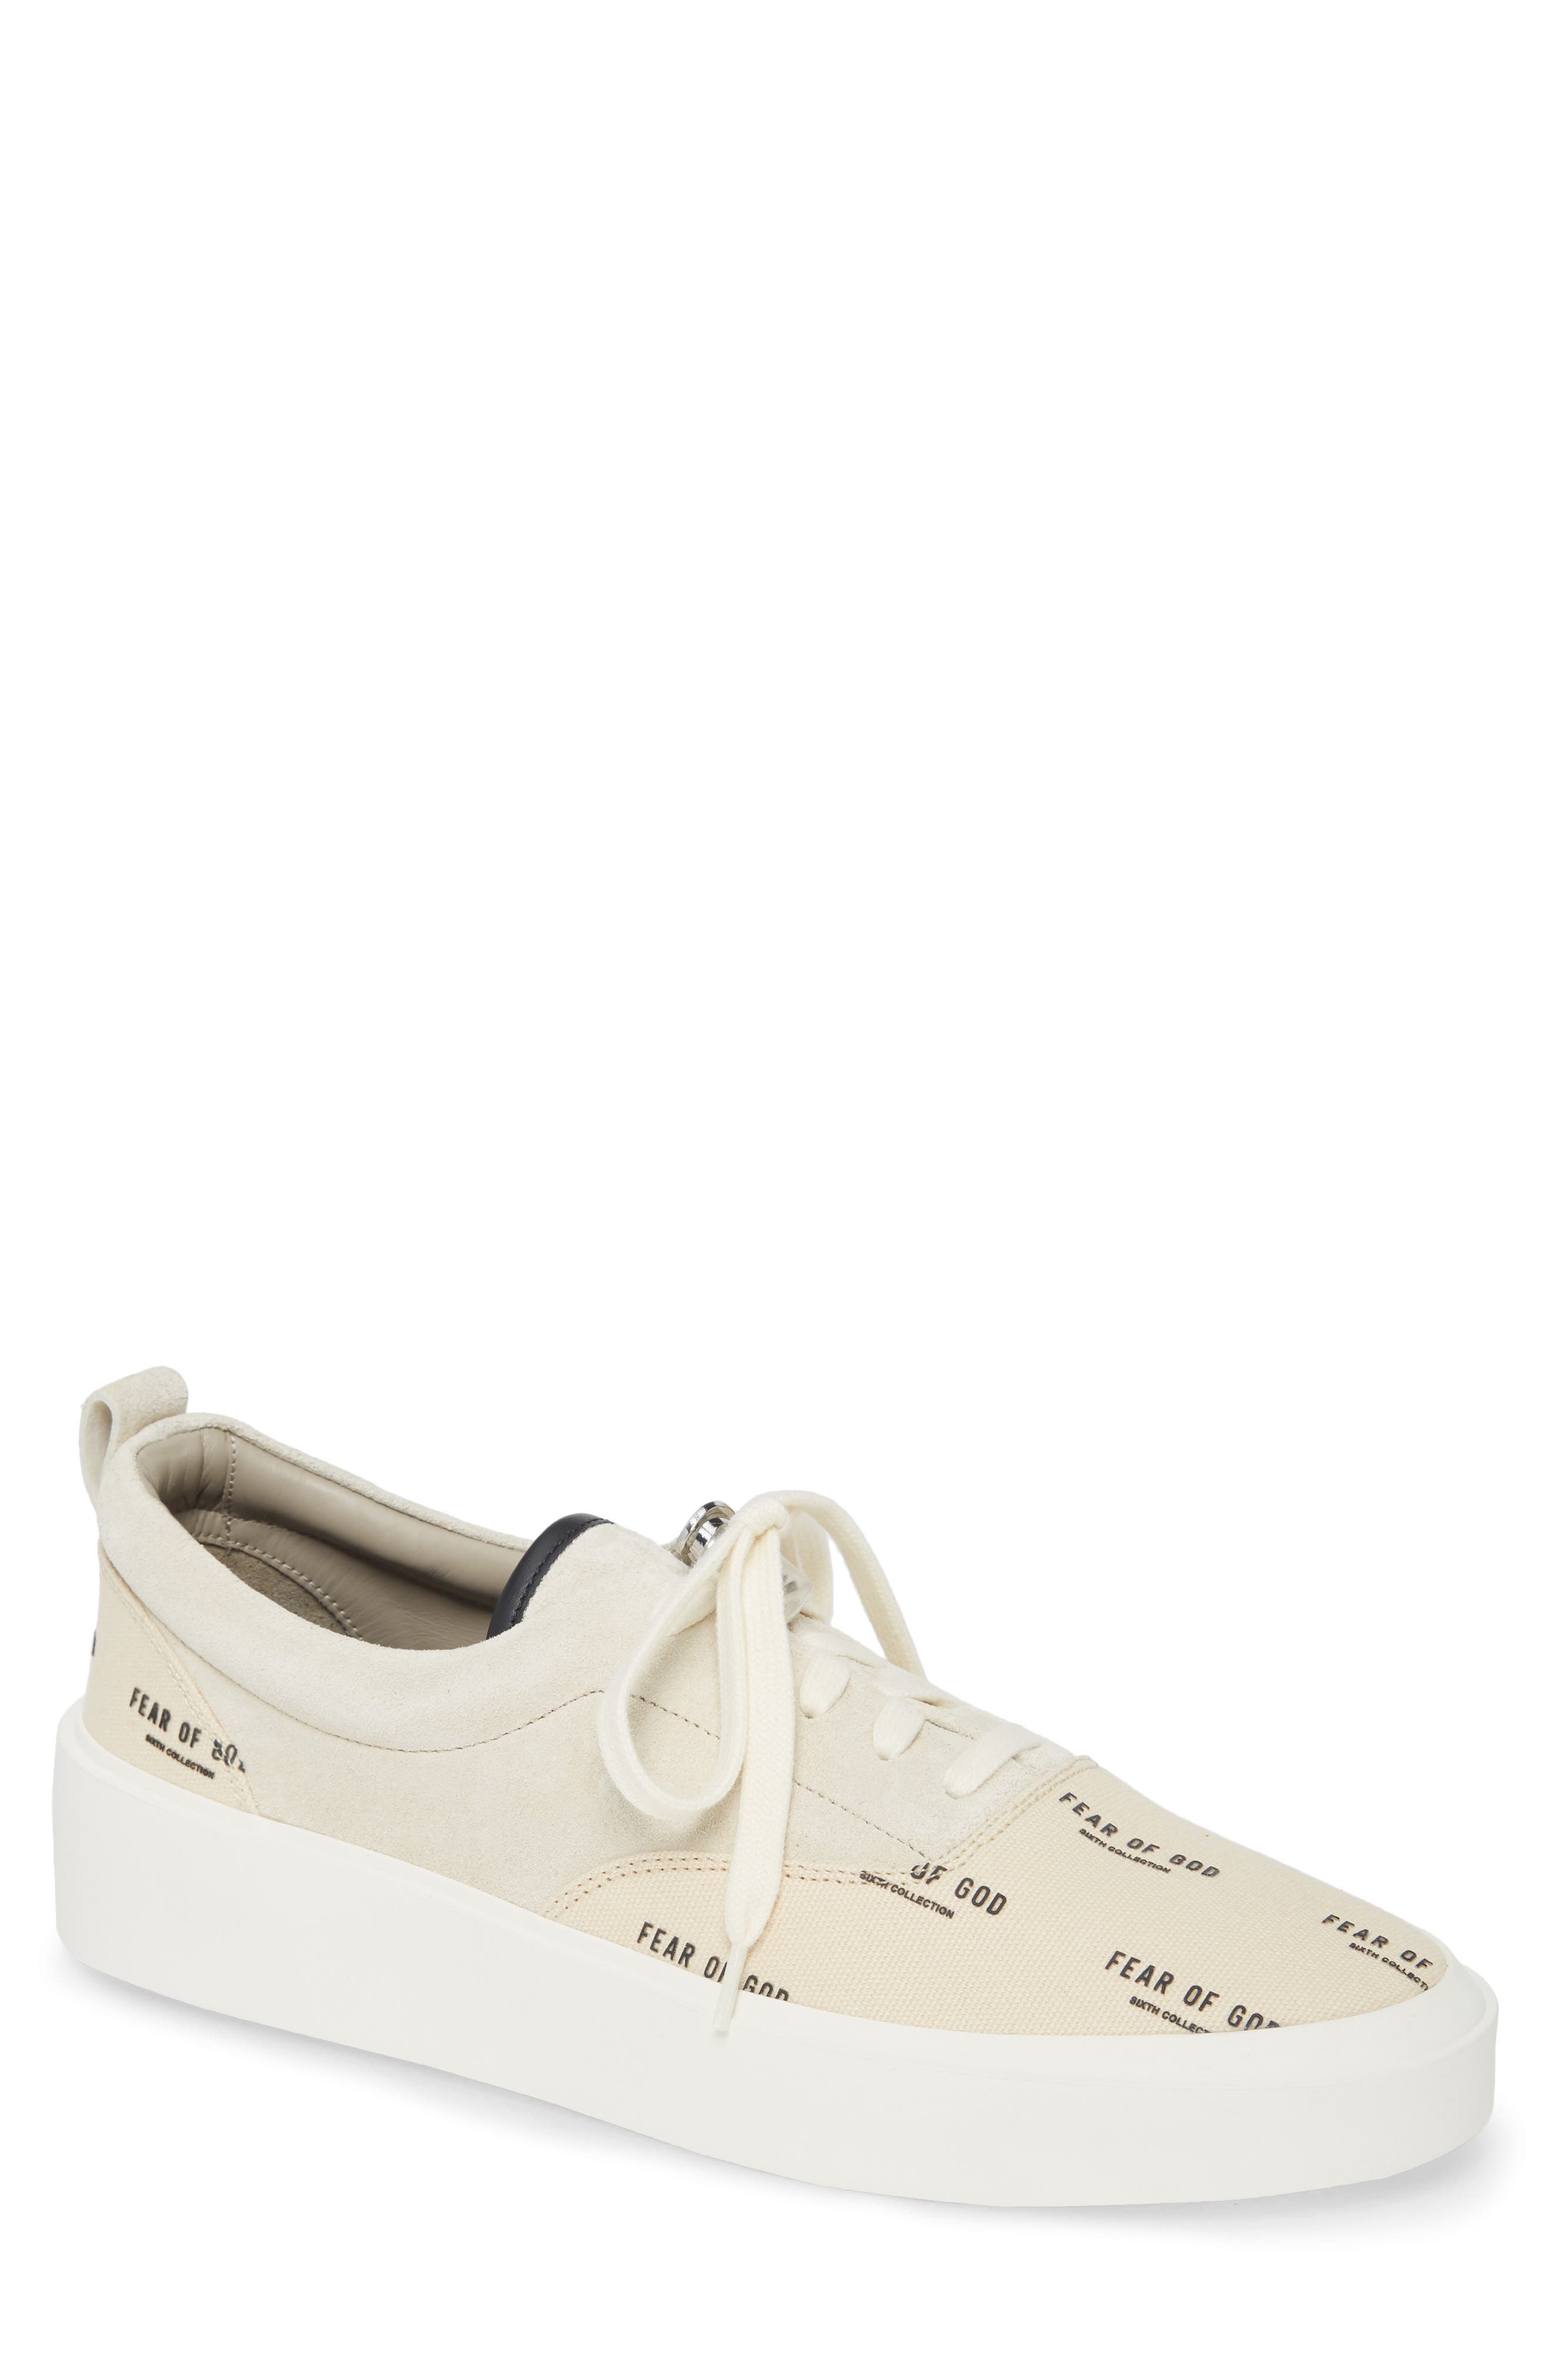 fear of god low top